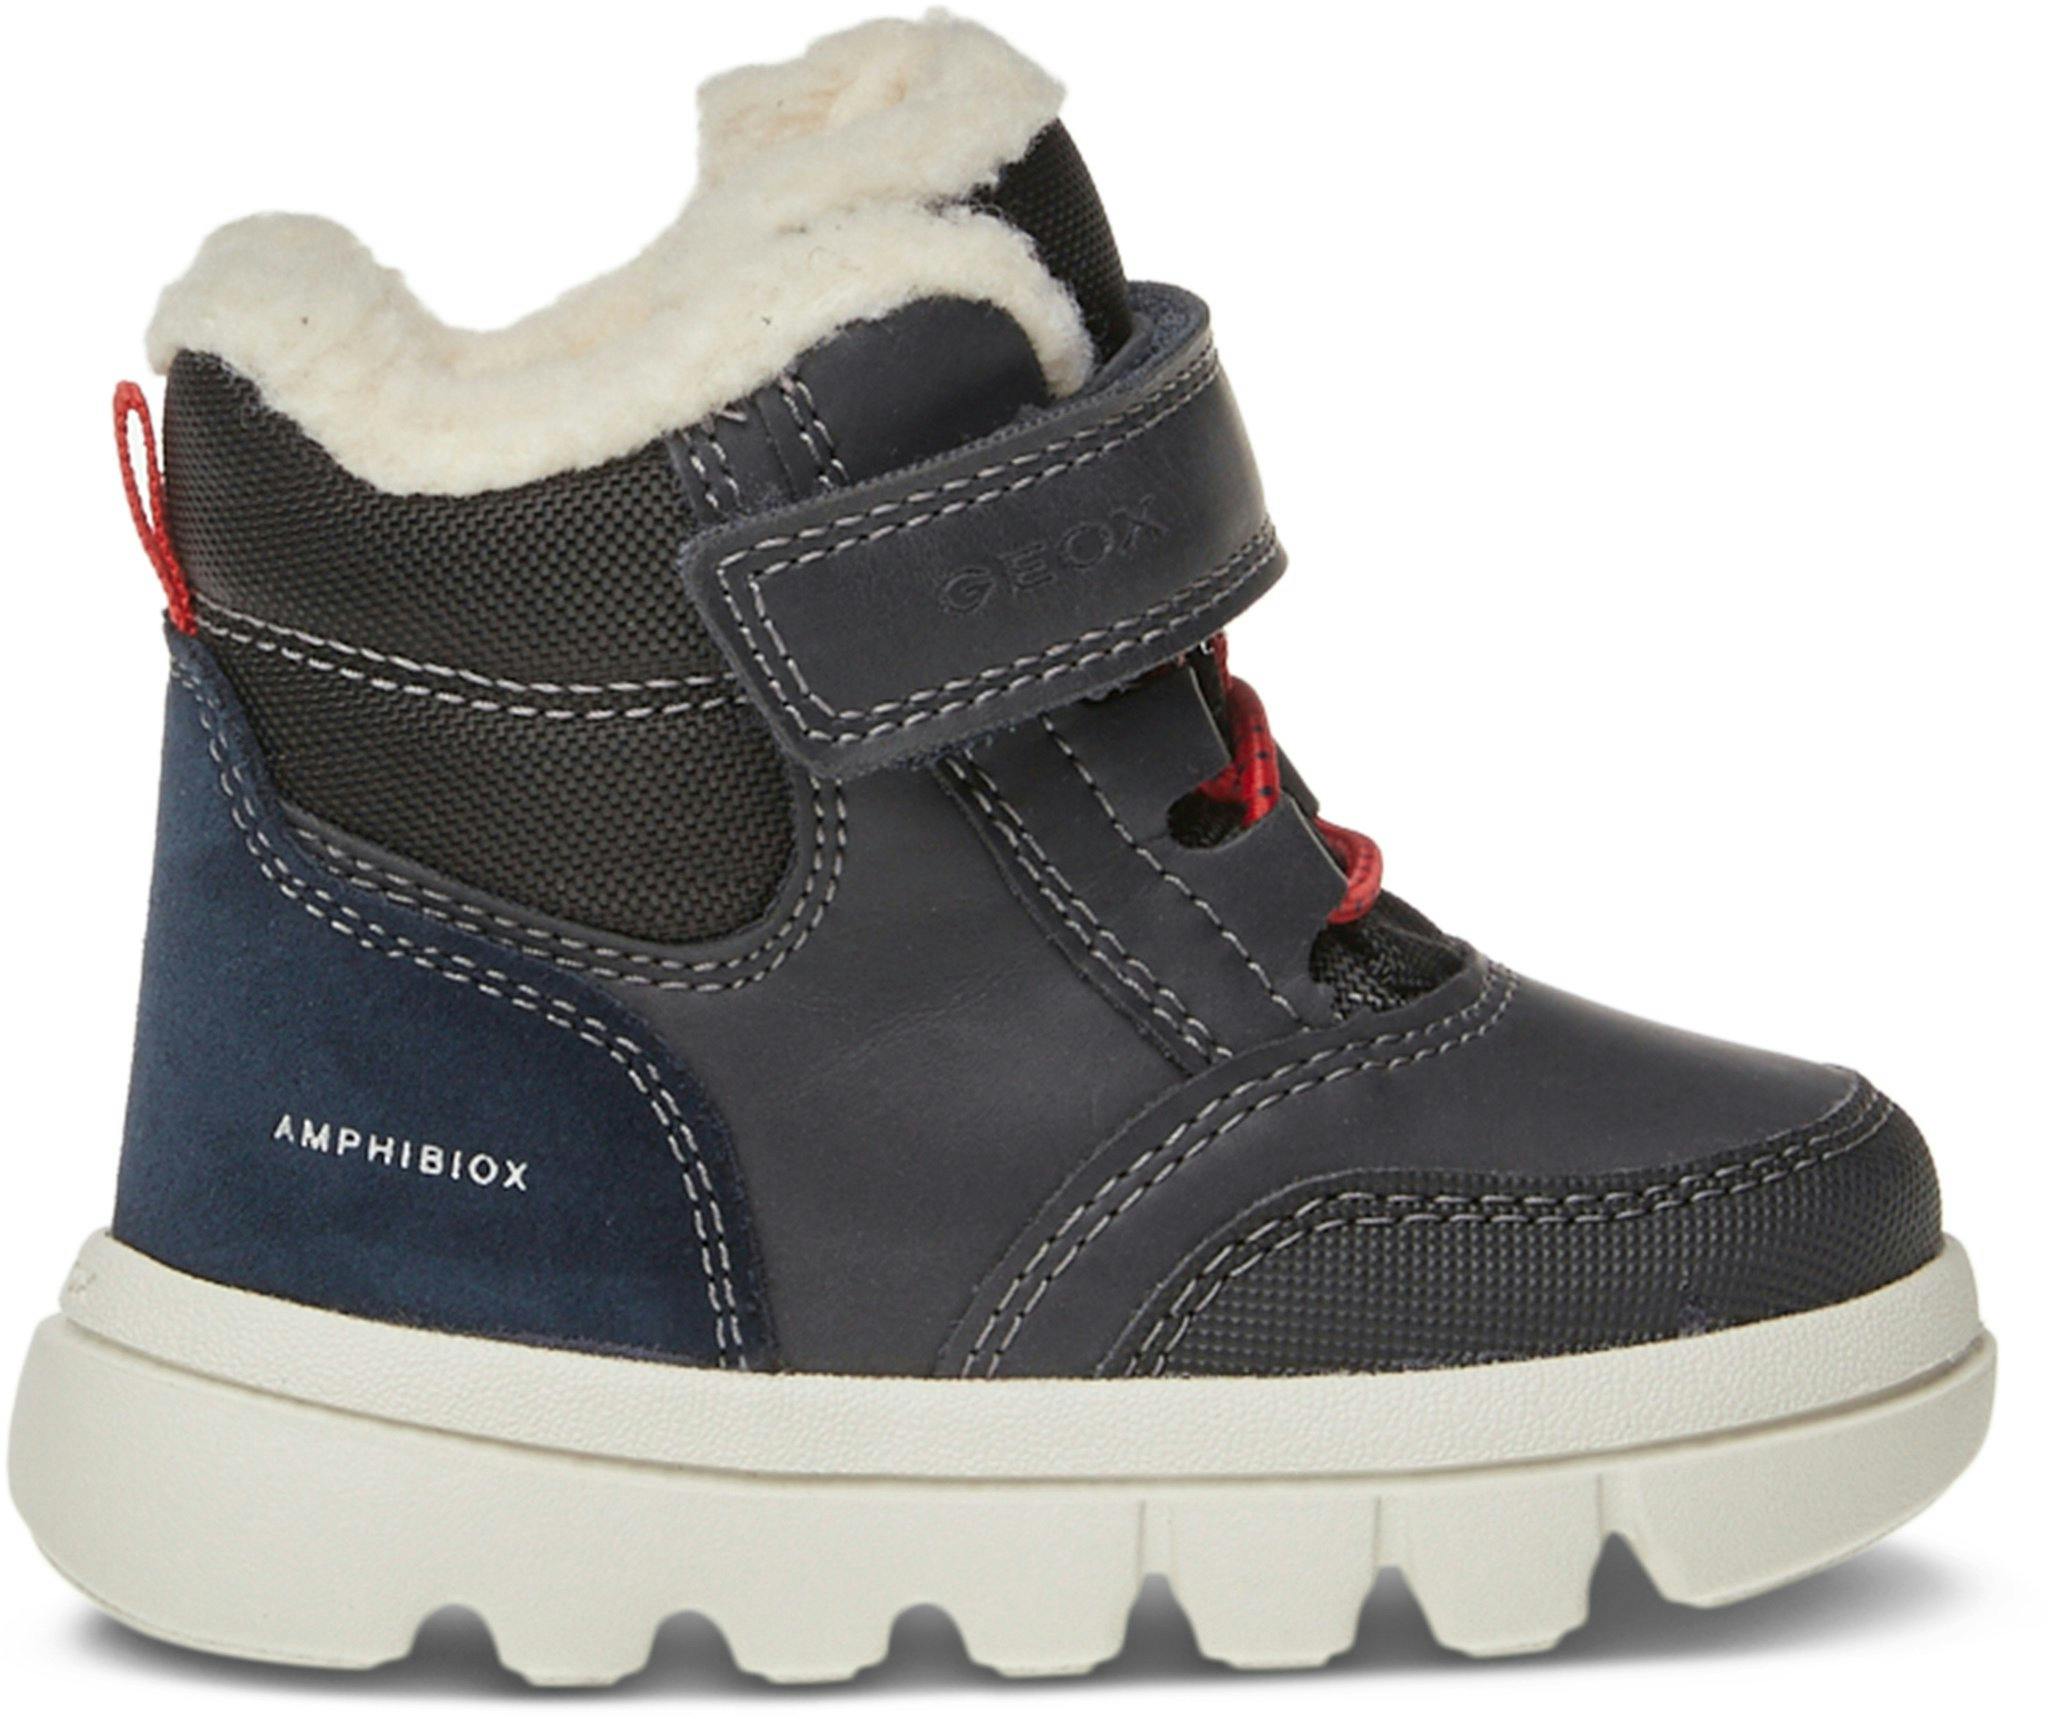 Product image for Willaboom ABX Waterproof Boots - Toddler